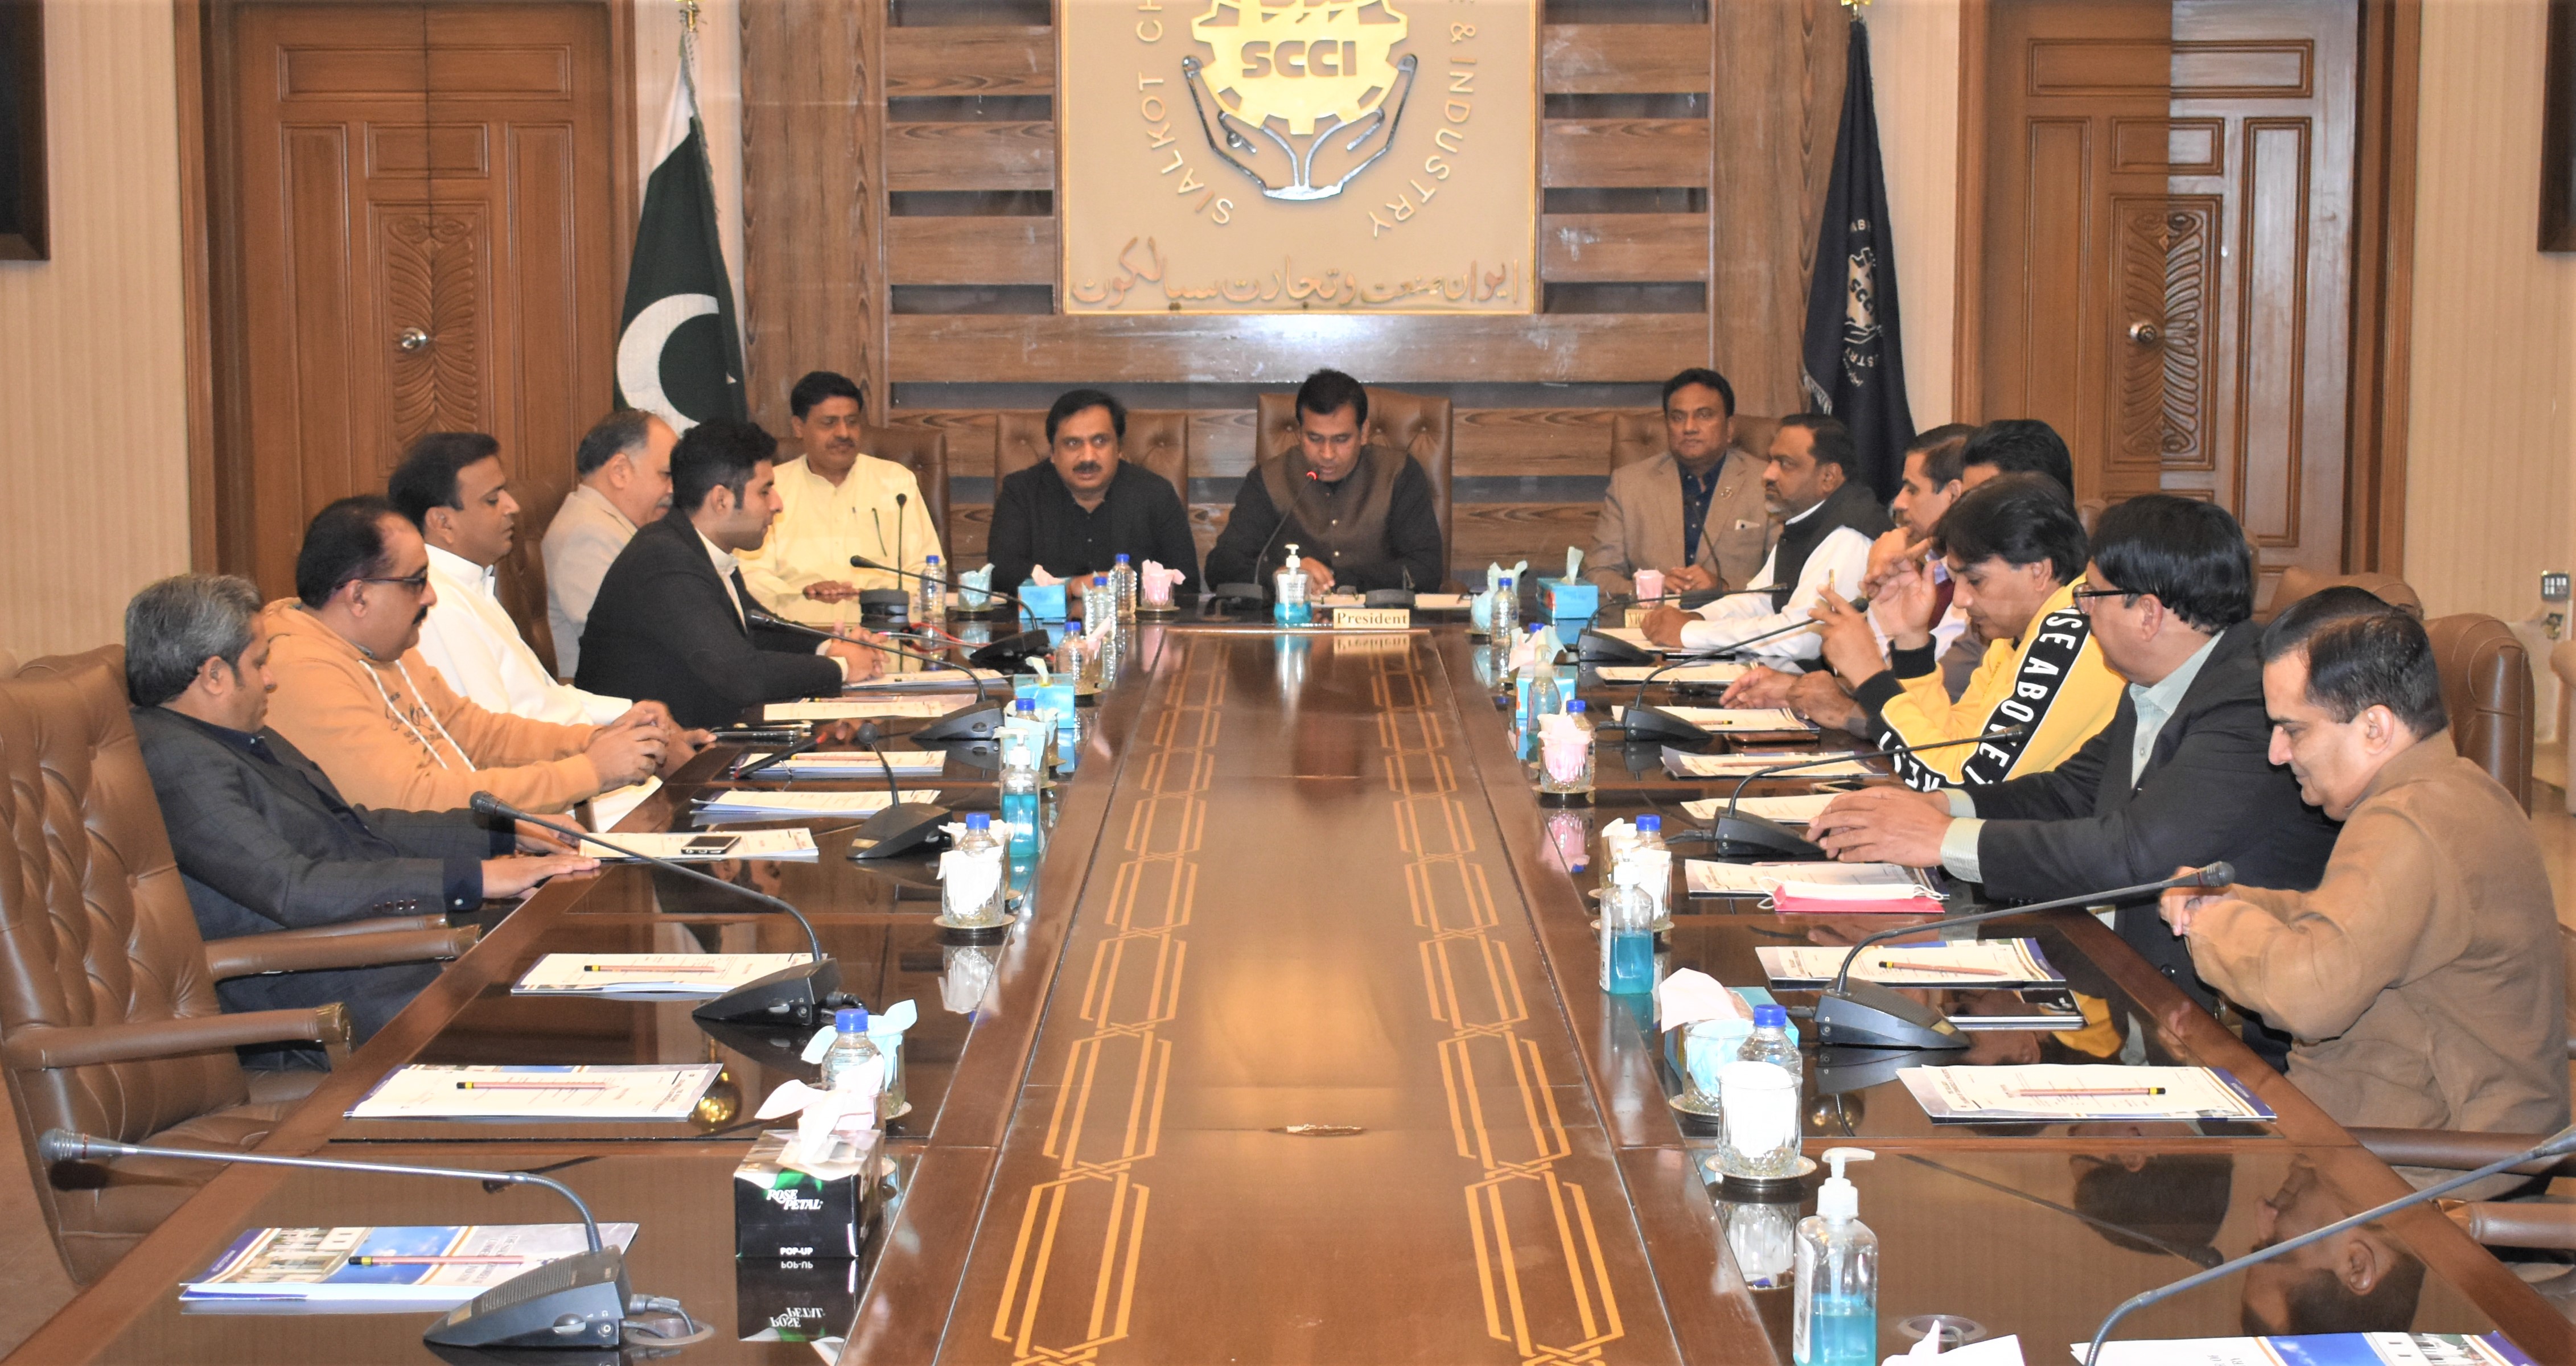 In a meeting held on November 19, 2021, SCCI Departmental Committee on Sports Activities discussed matters relating to planning and arranging a cricket match between British High Commission, Islamabad and Sialkot Chamber of Commerce and Industry.  In addition, the Committee Members resolved that SCCI would organize Hockey Tournaments at the district level to restore Pakistan’s national sport (Hockey) to its former glory.